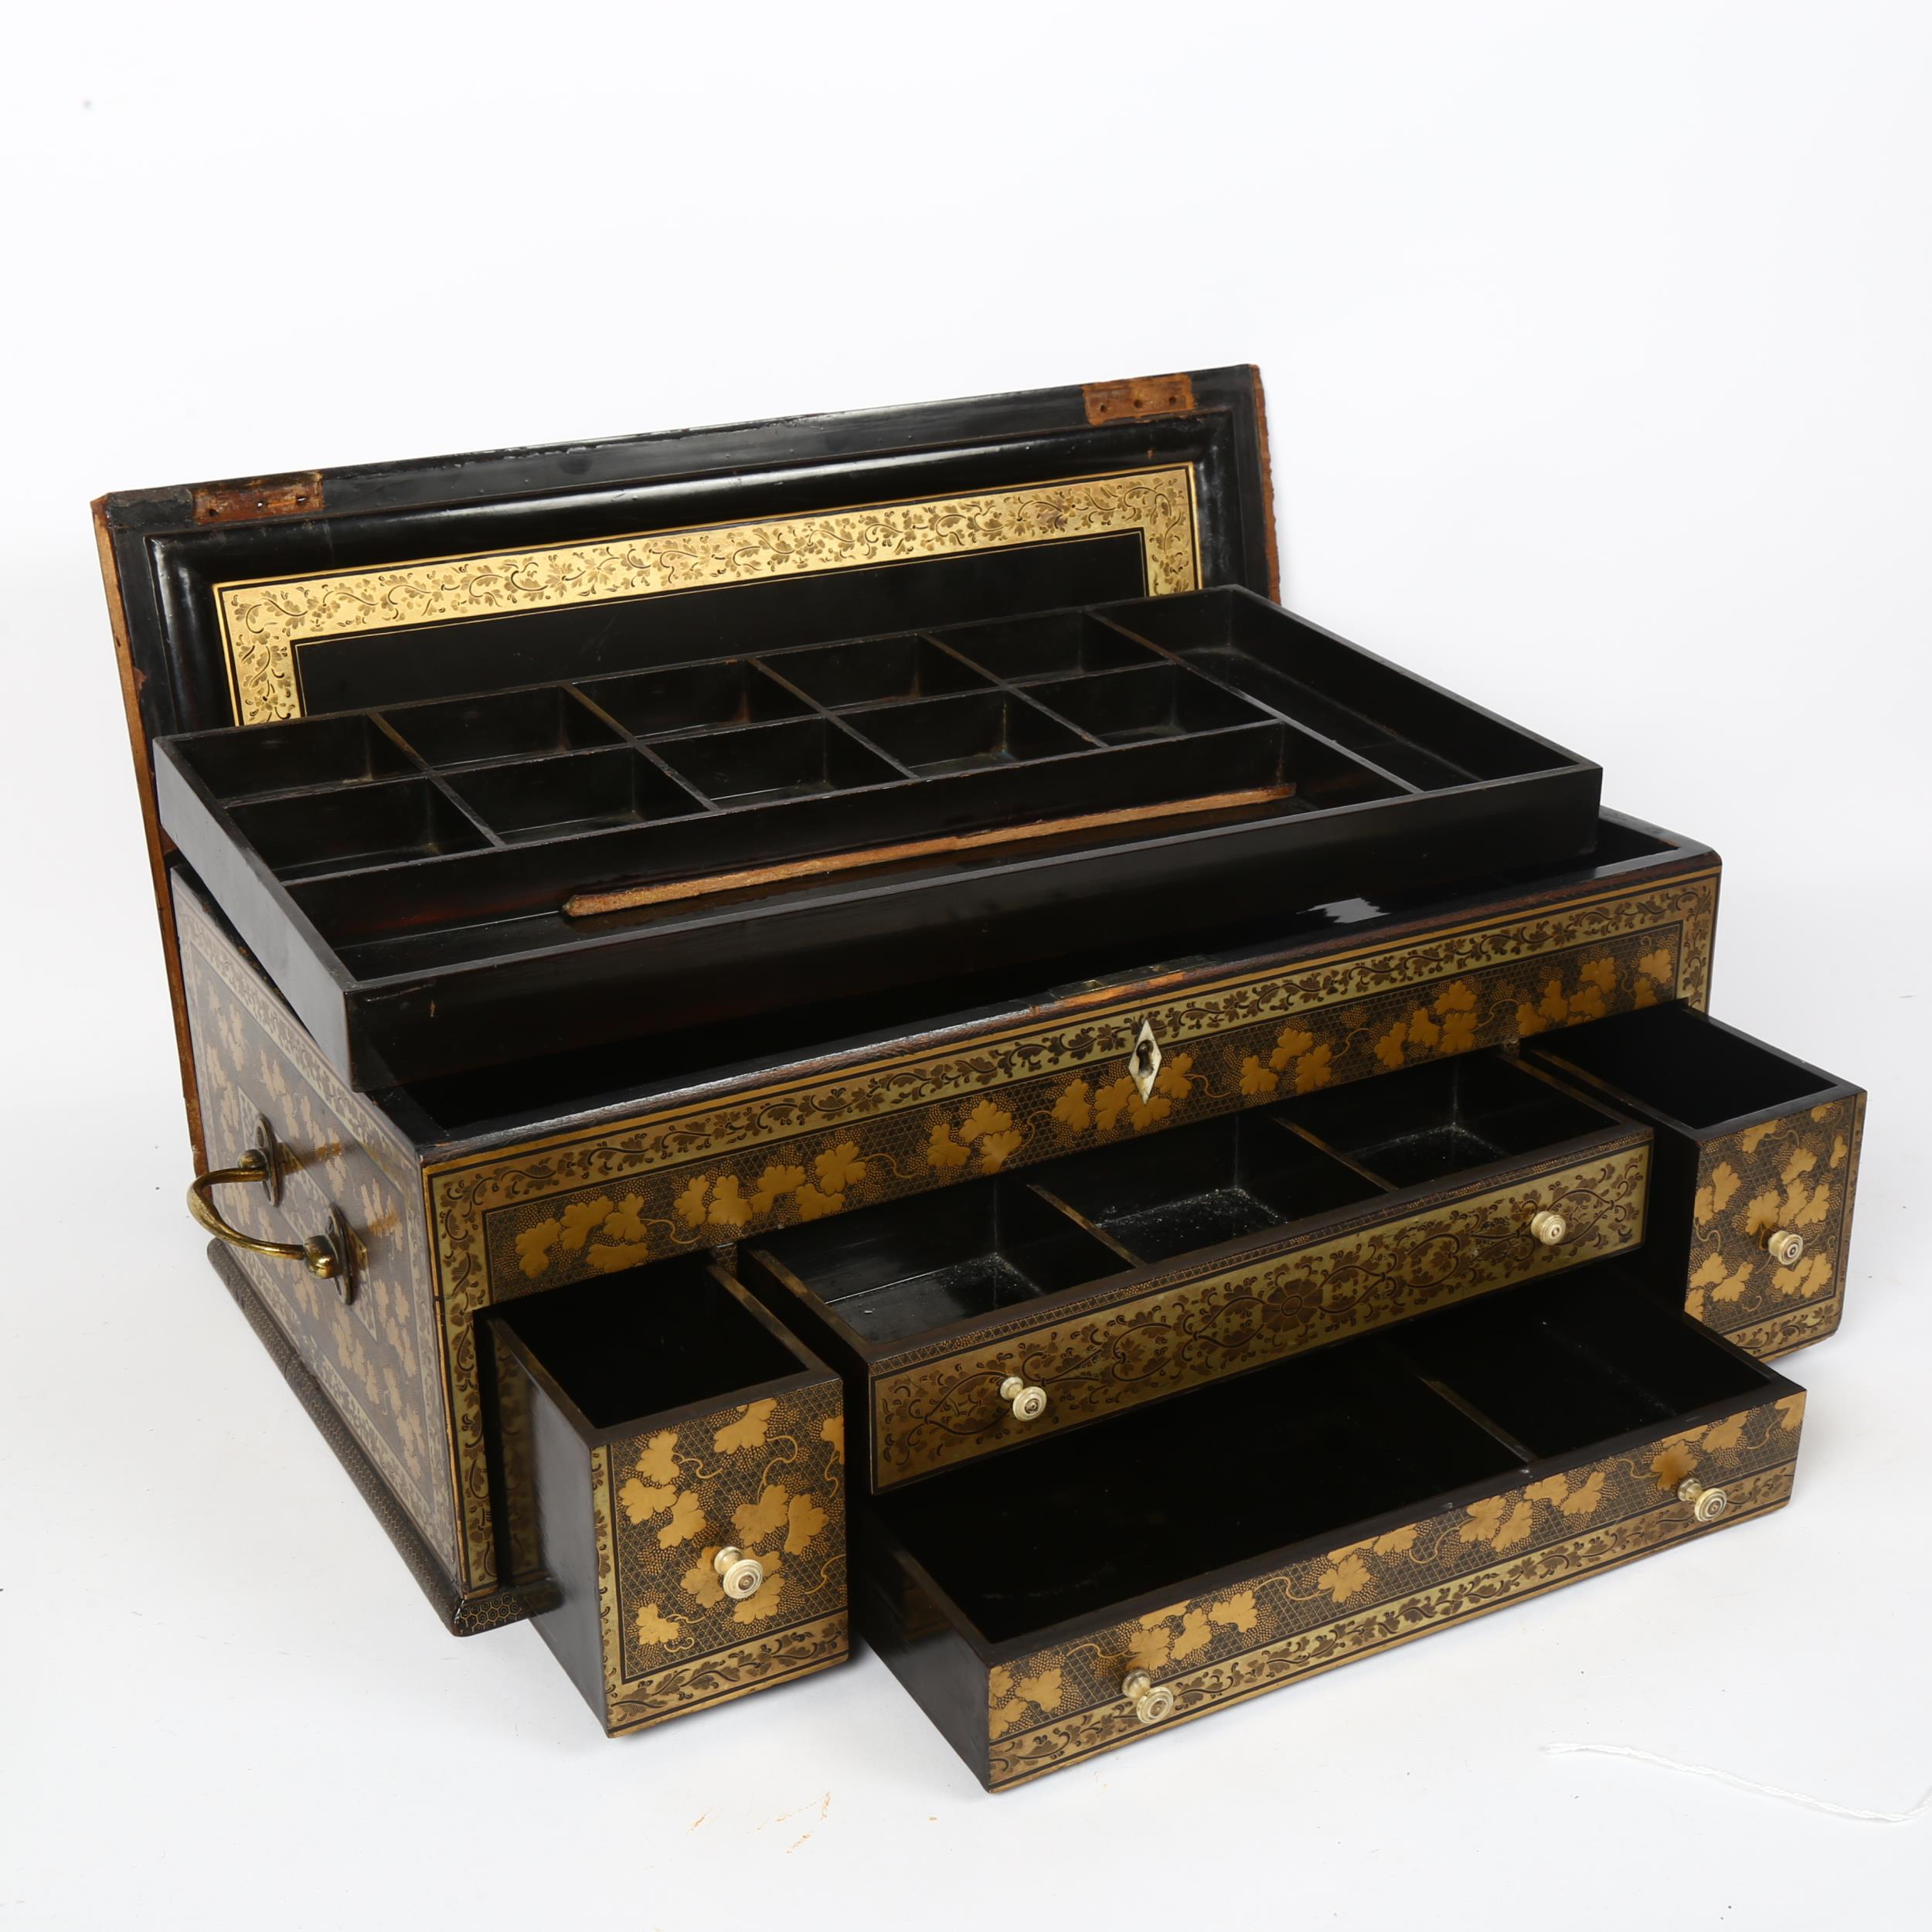 An Antique Anglo-Indian lacquered jewel box, with rising lid and fitted drawers, with allover gilded - Bild 2 aus 2